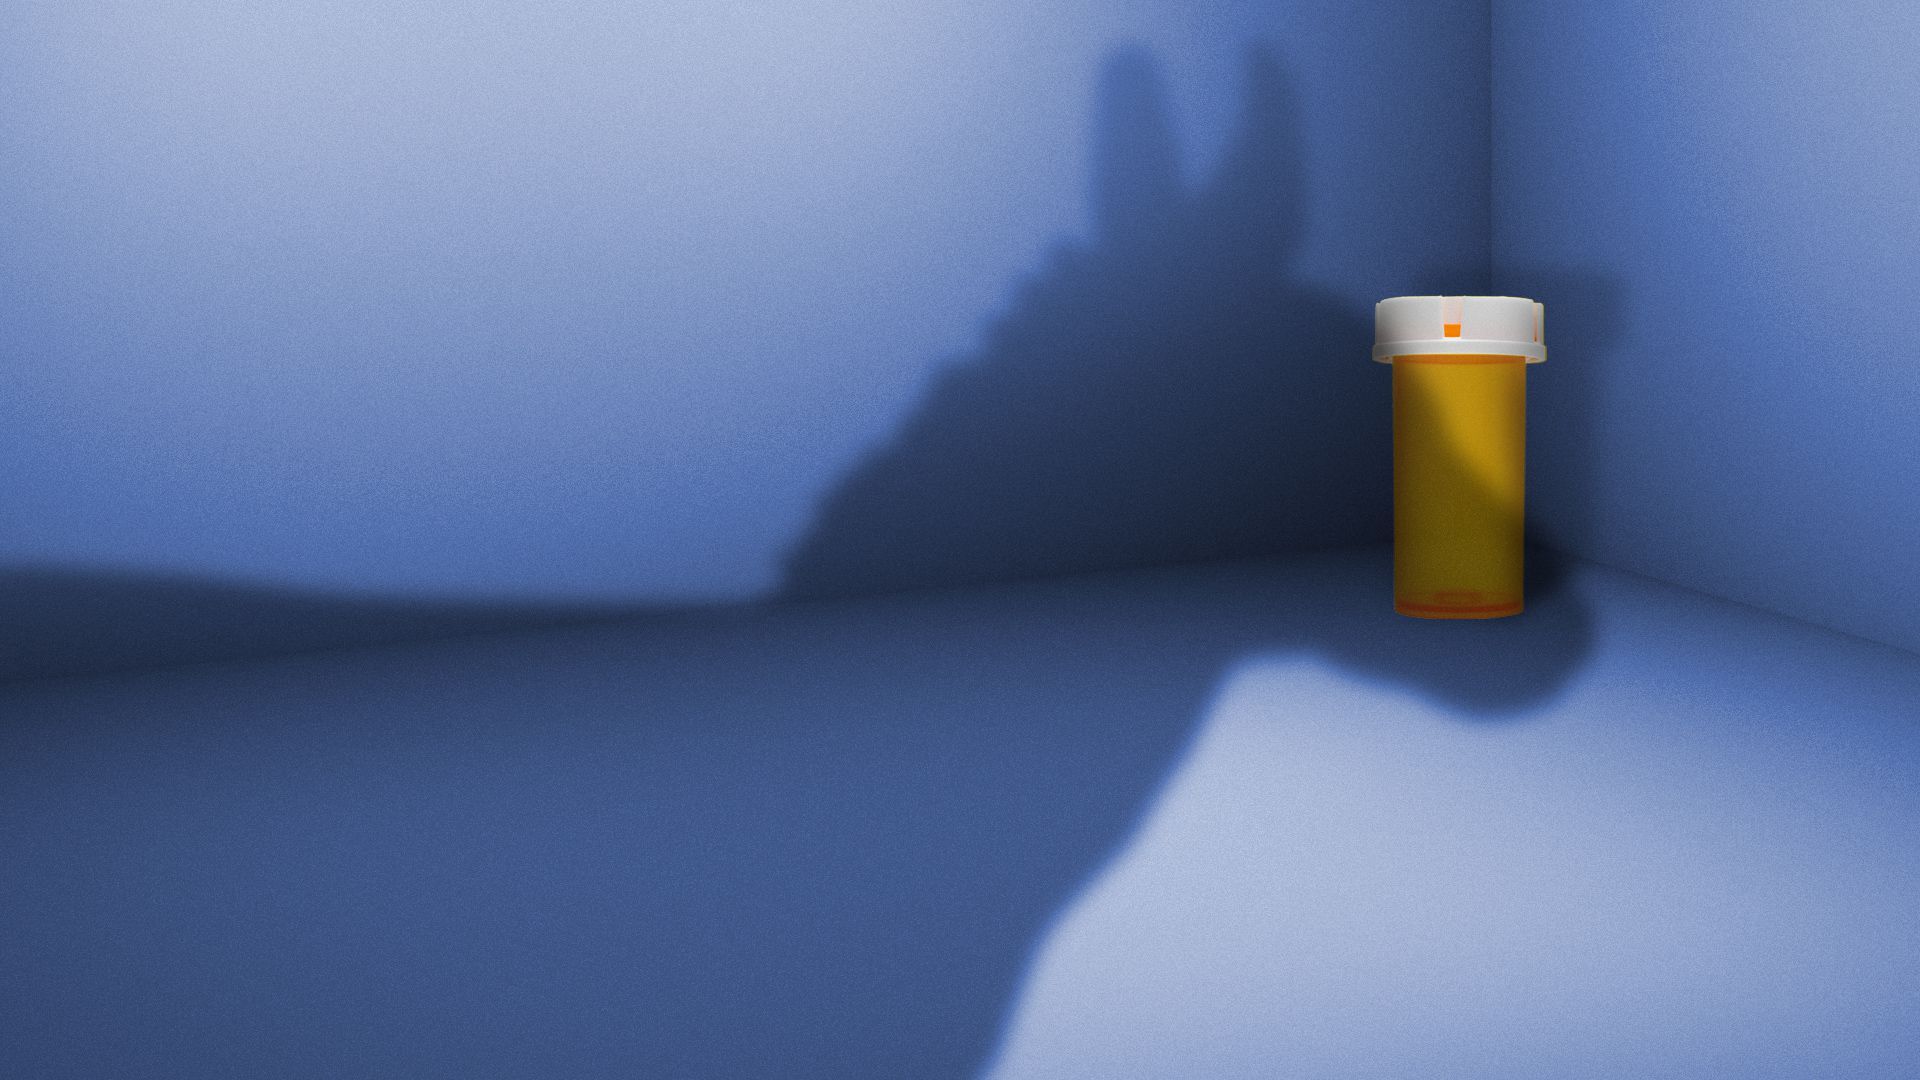 Illustration of a pill bottle backed into a corner with a large shadow of a donkey looming above it.